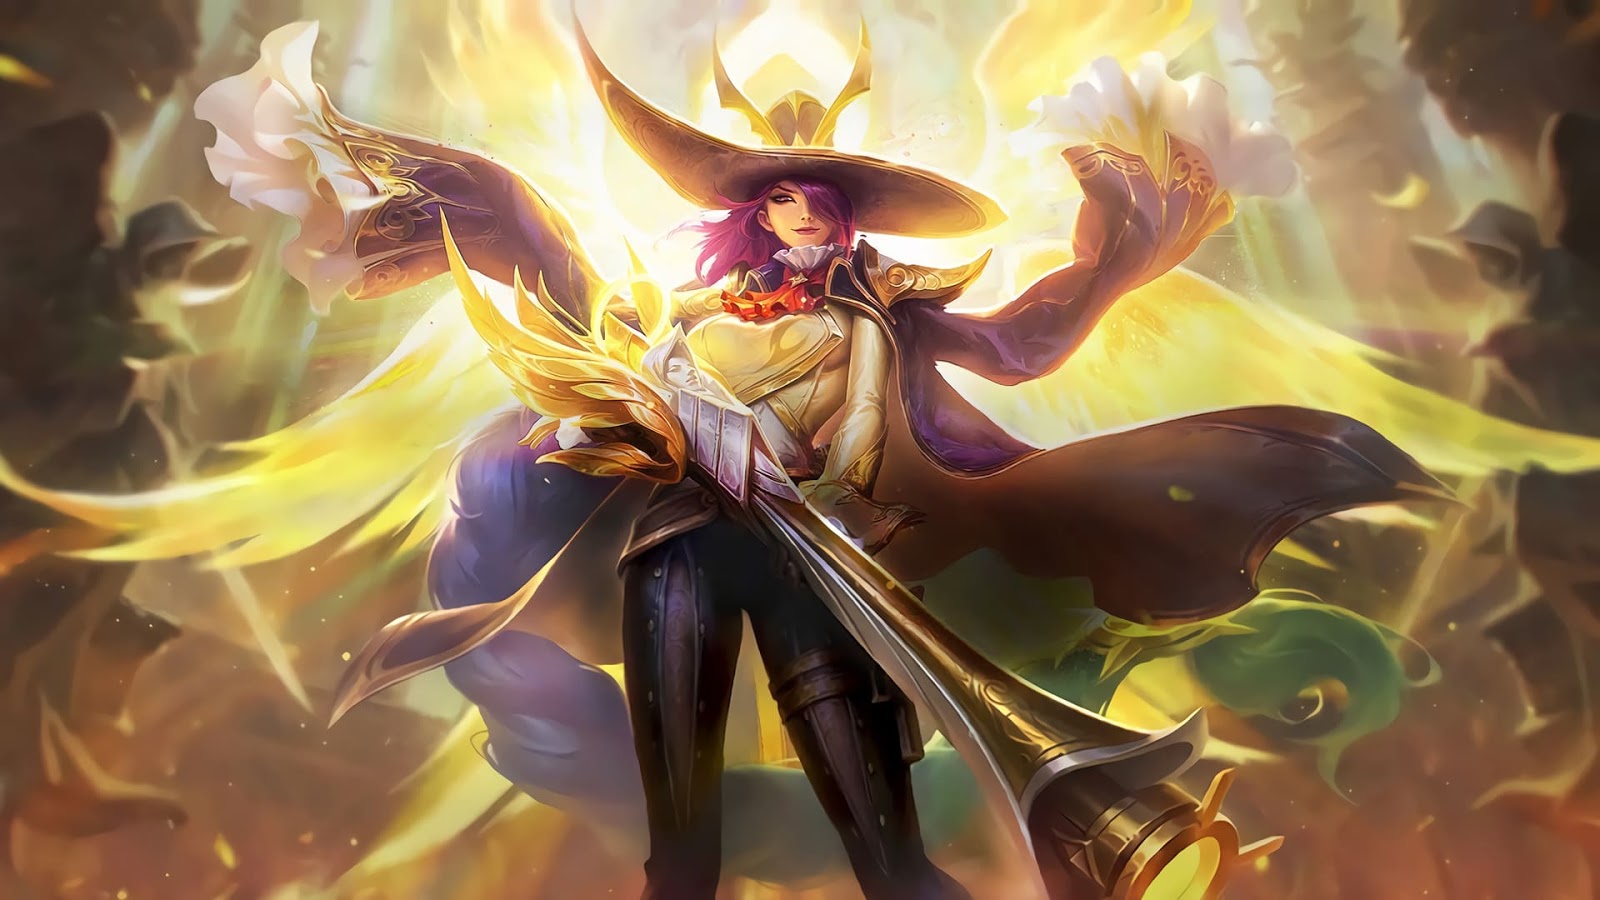 10+ Wallpaper Lesley Mobile Legends Full HD for PC, Android & iOS